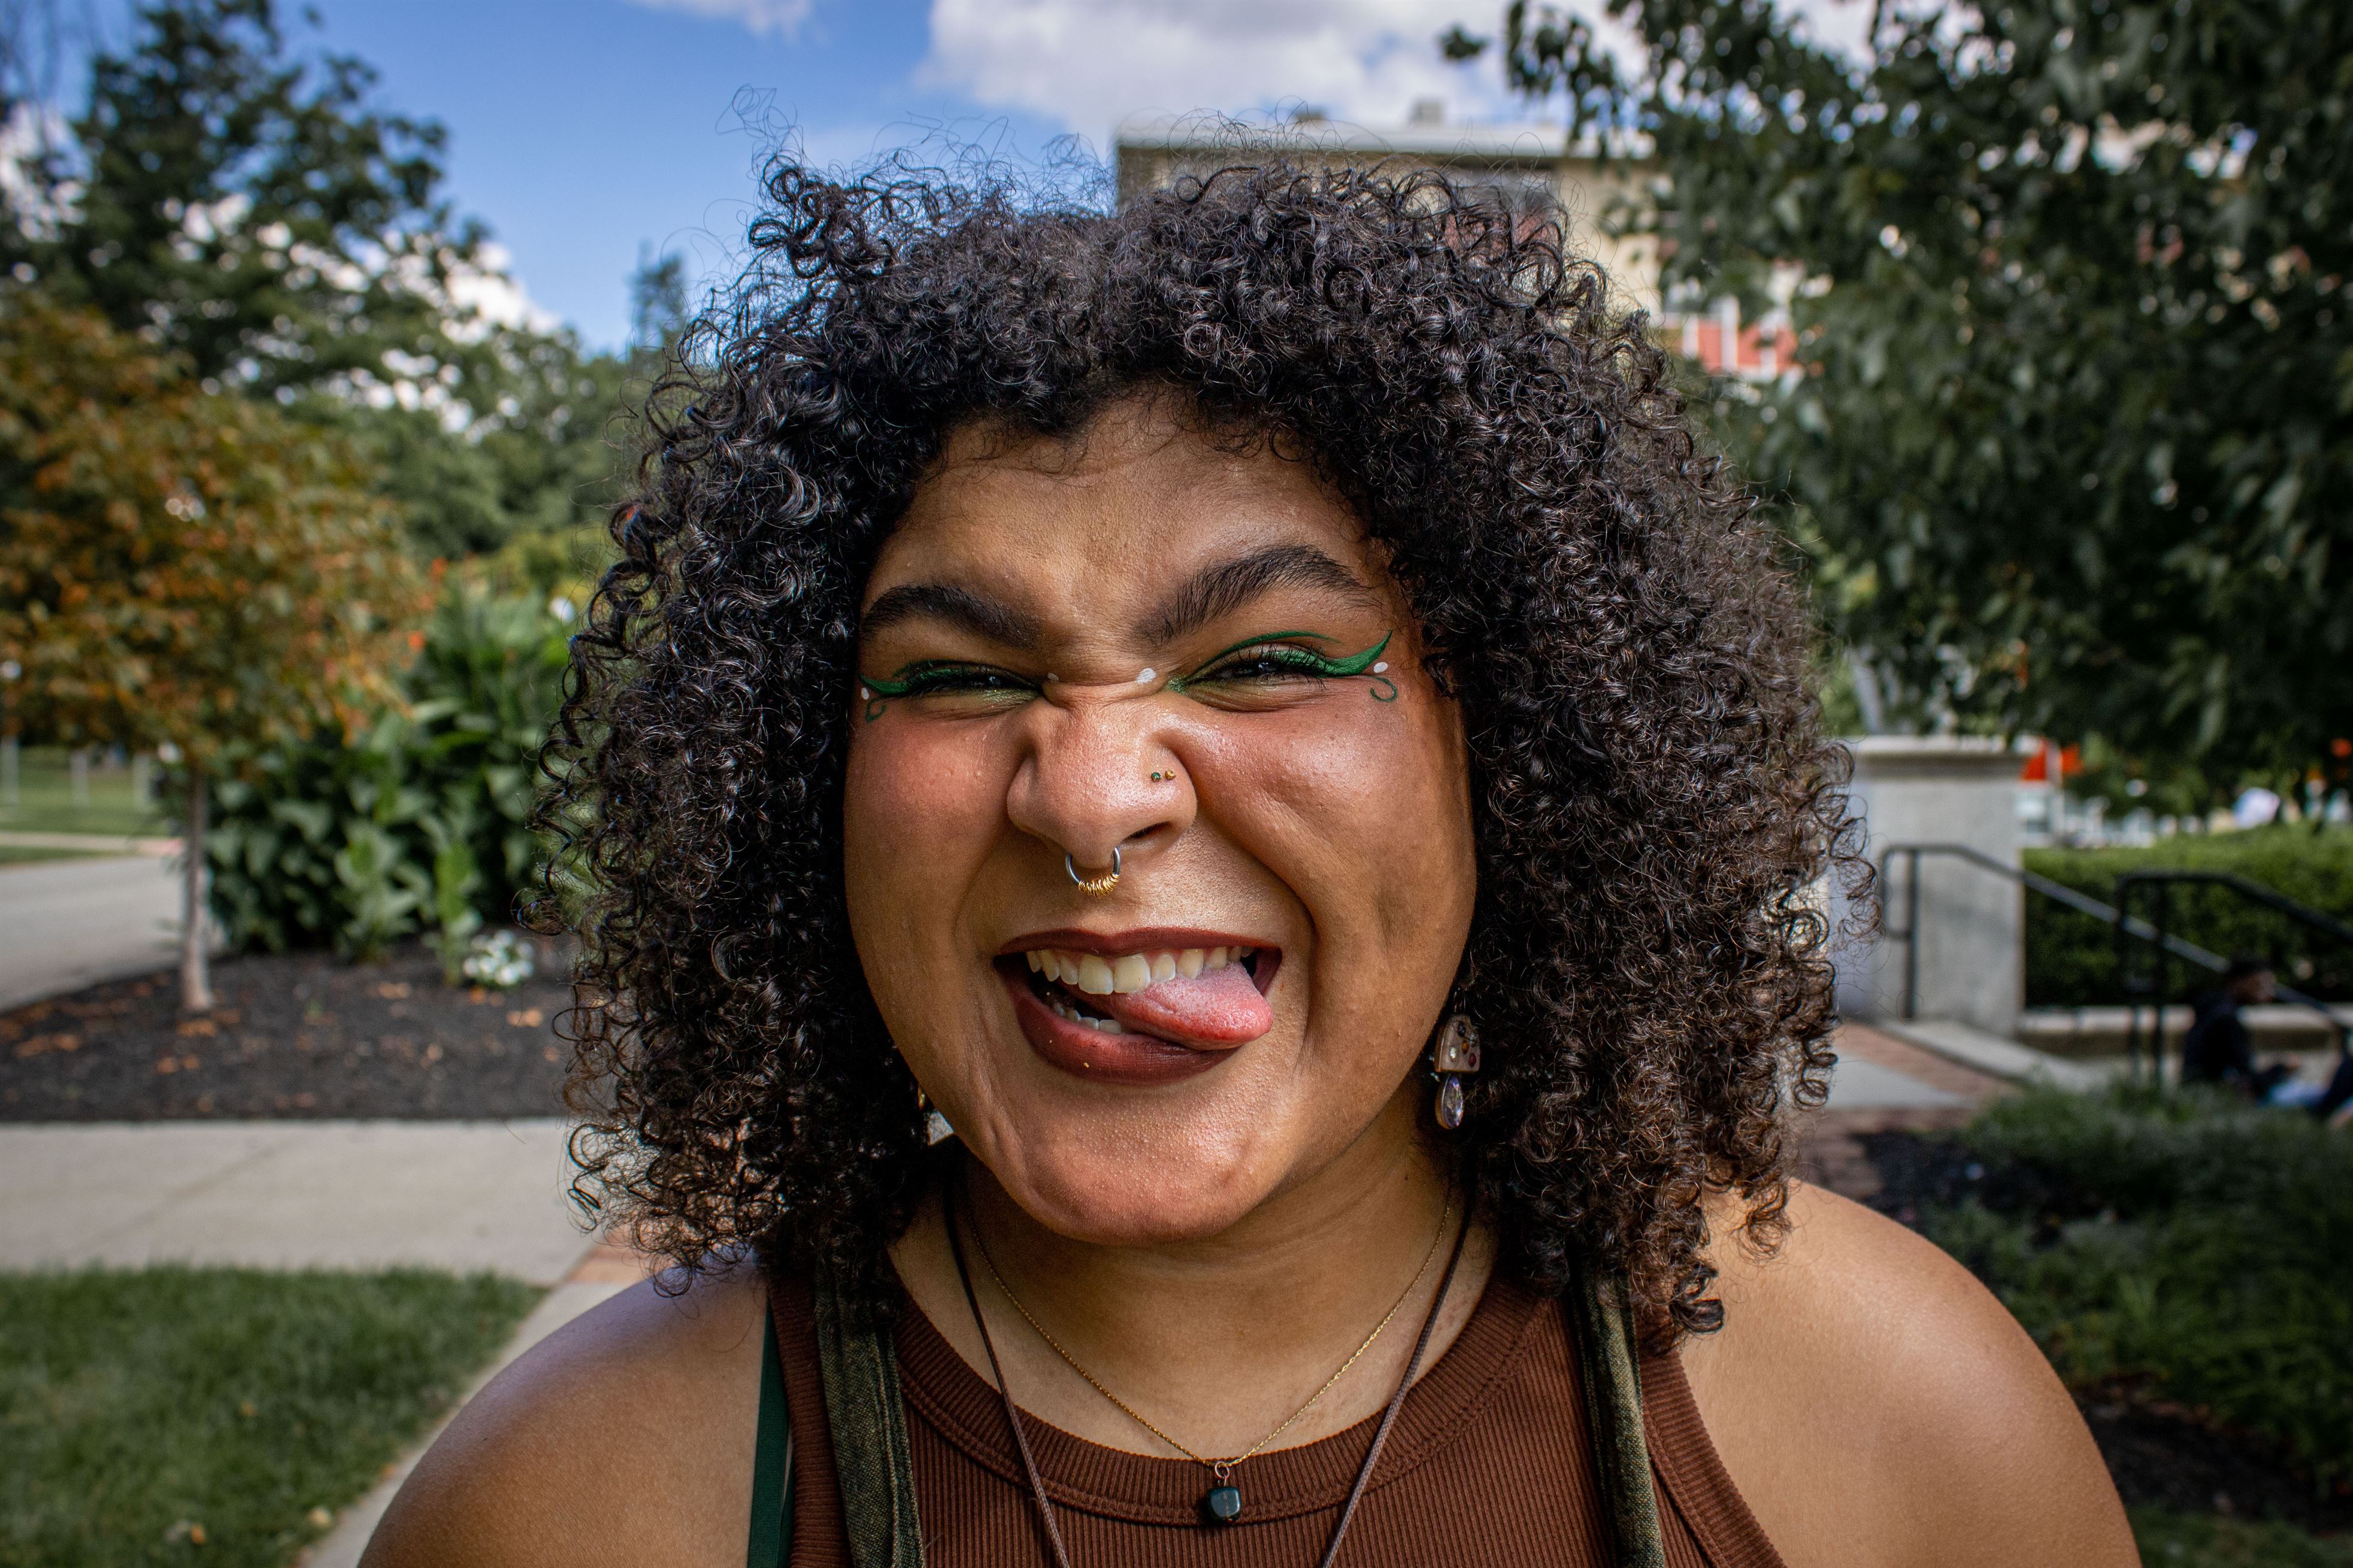 Arianna Joseph, sophomore music education major, matches her green and floral overalls to her eye makeup.